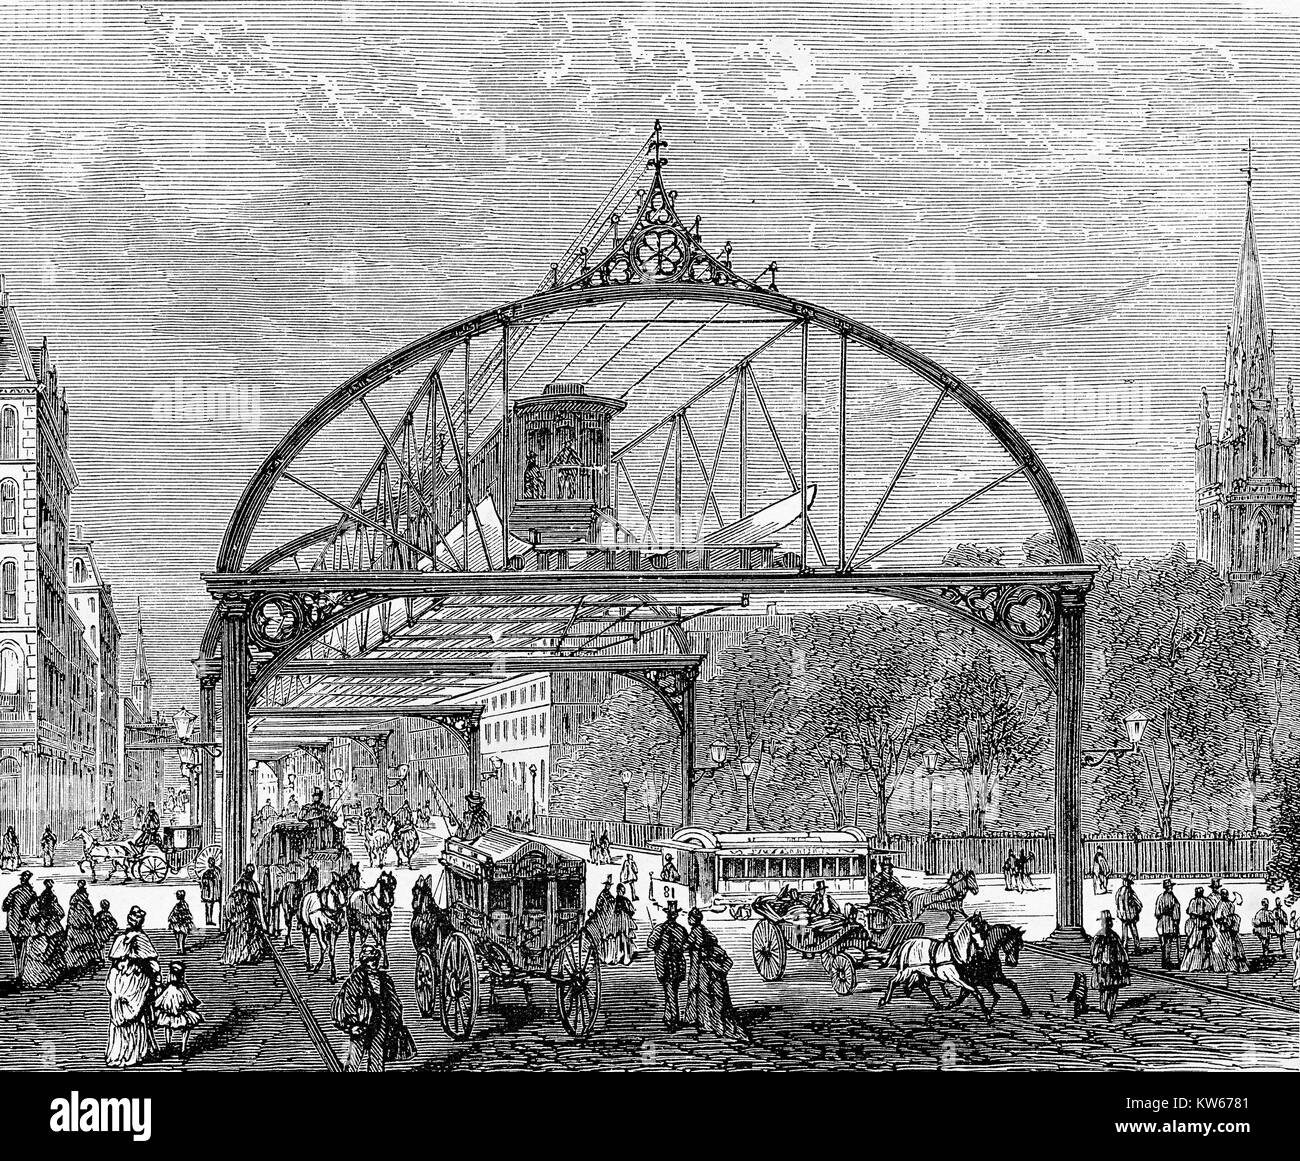 Dr. R.H. Gilbert project of a covered atmospheric elevated railway for New York City transit. Proposed in 1872 but never built, vintage engraving Stock Photo